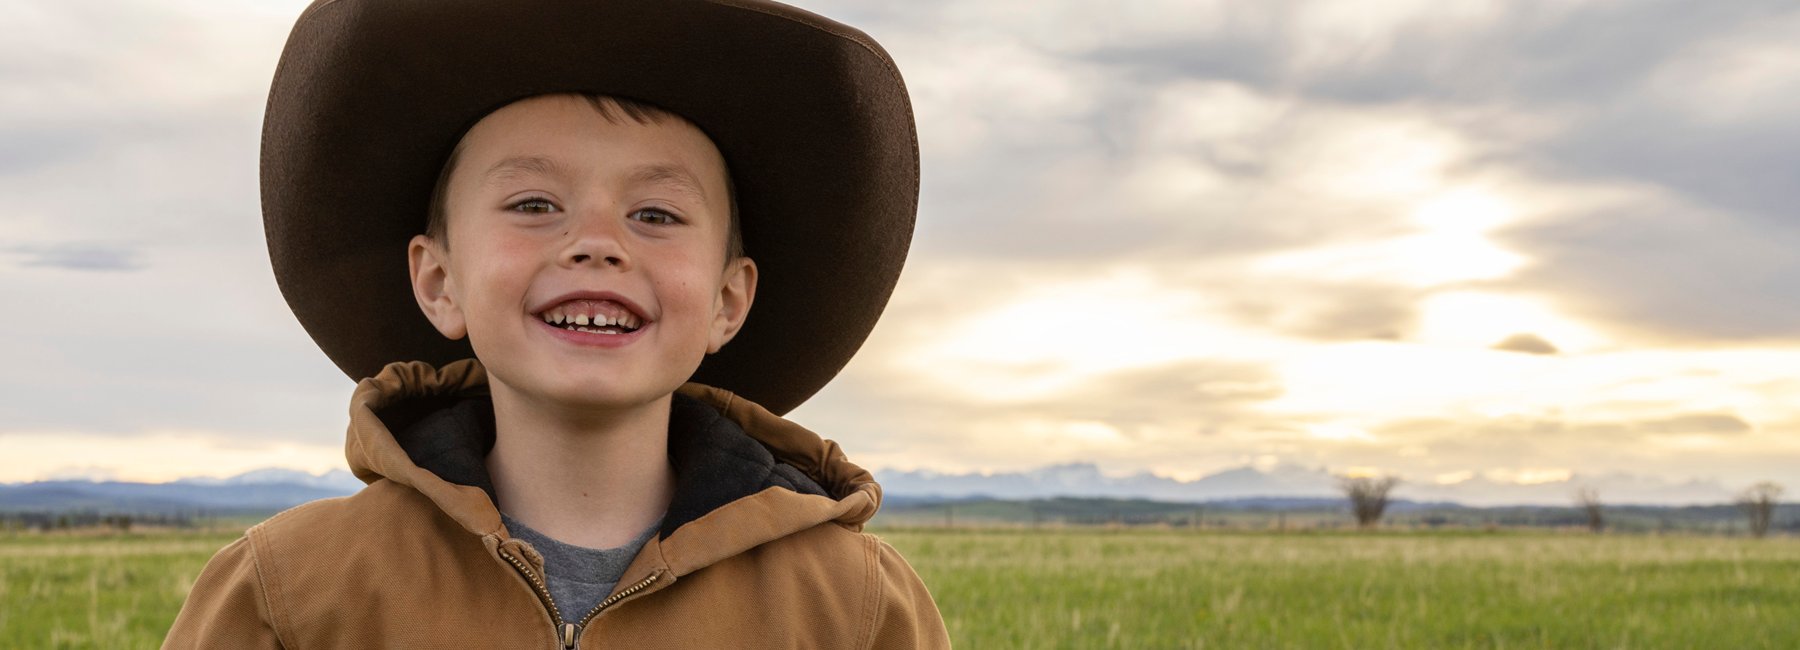 Young boy standing in a field in Alberta.